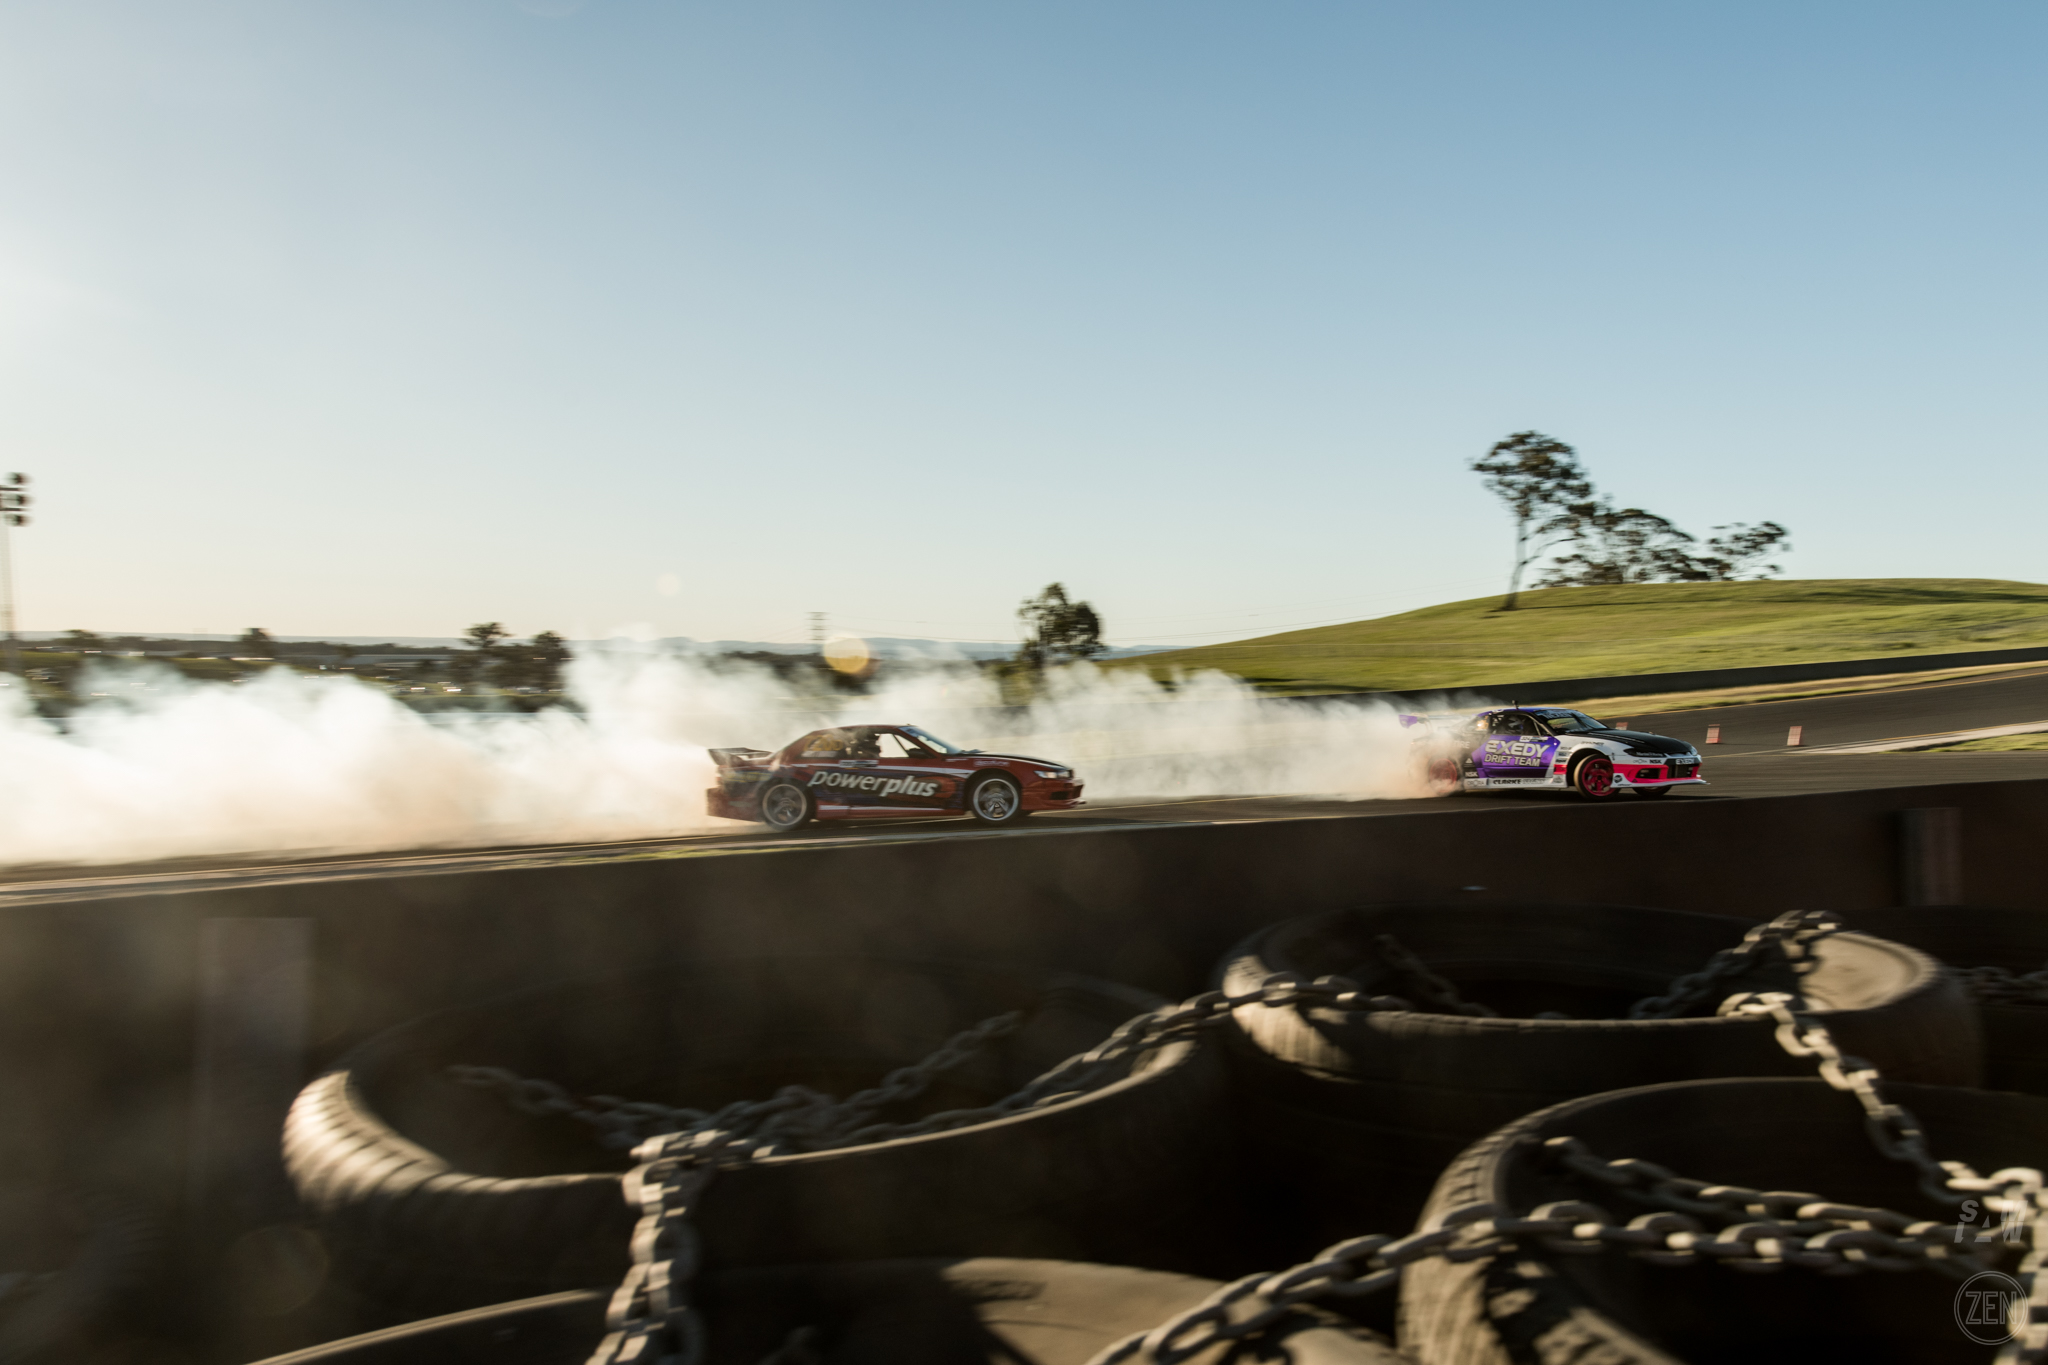 2019-10-18 - WTAC Day 01 062